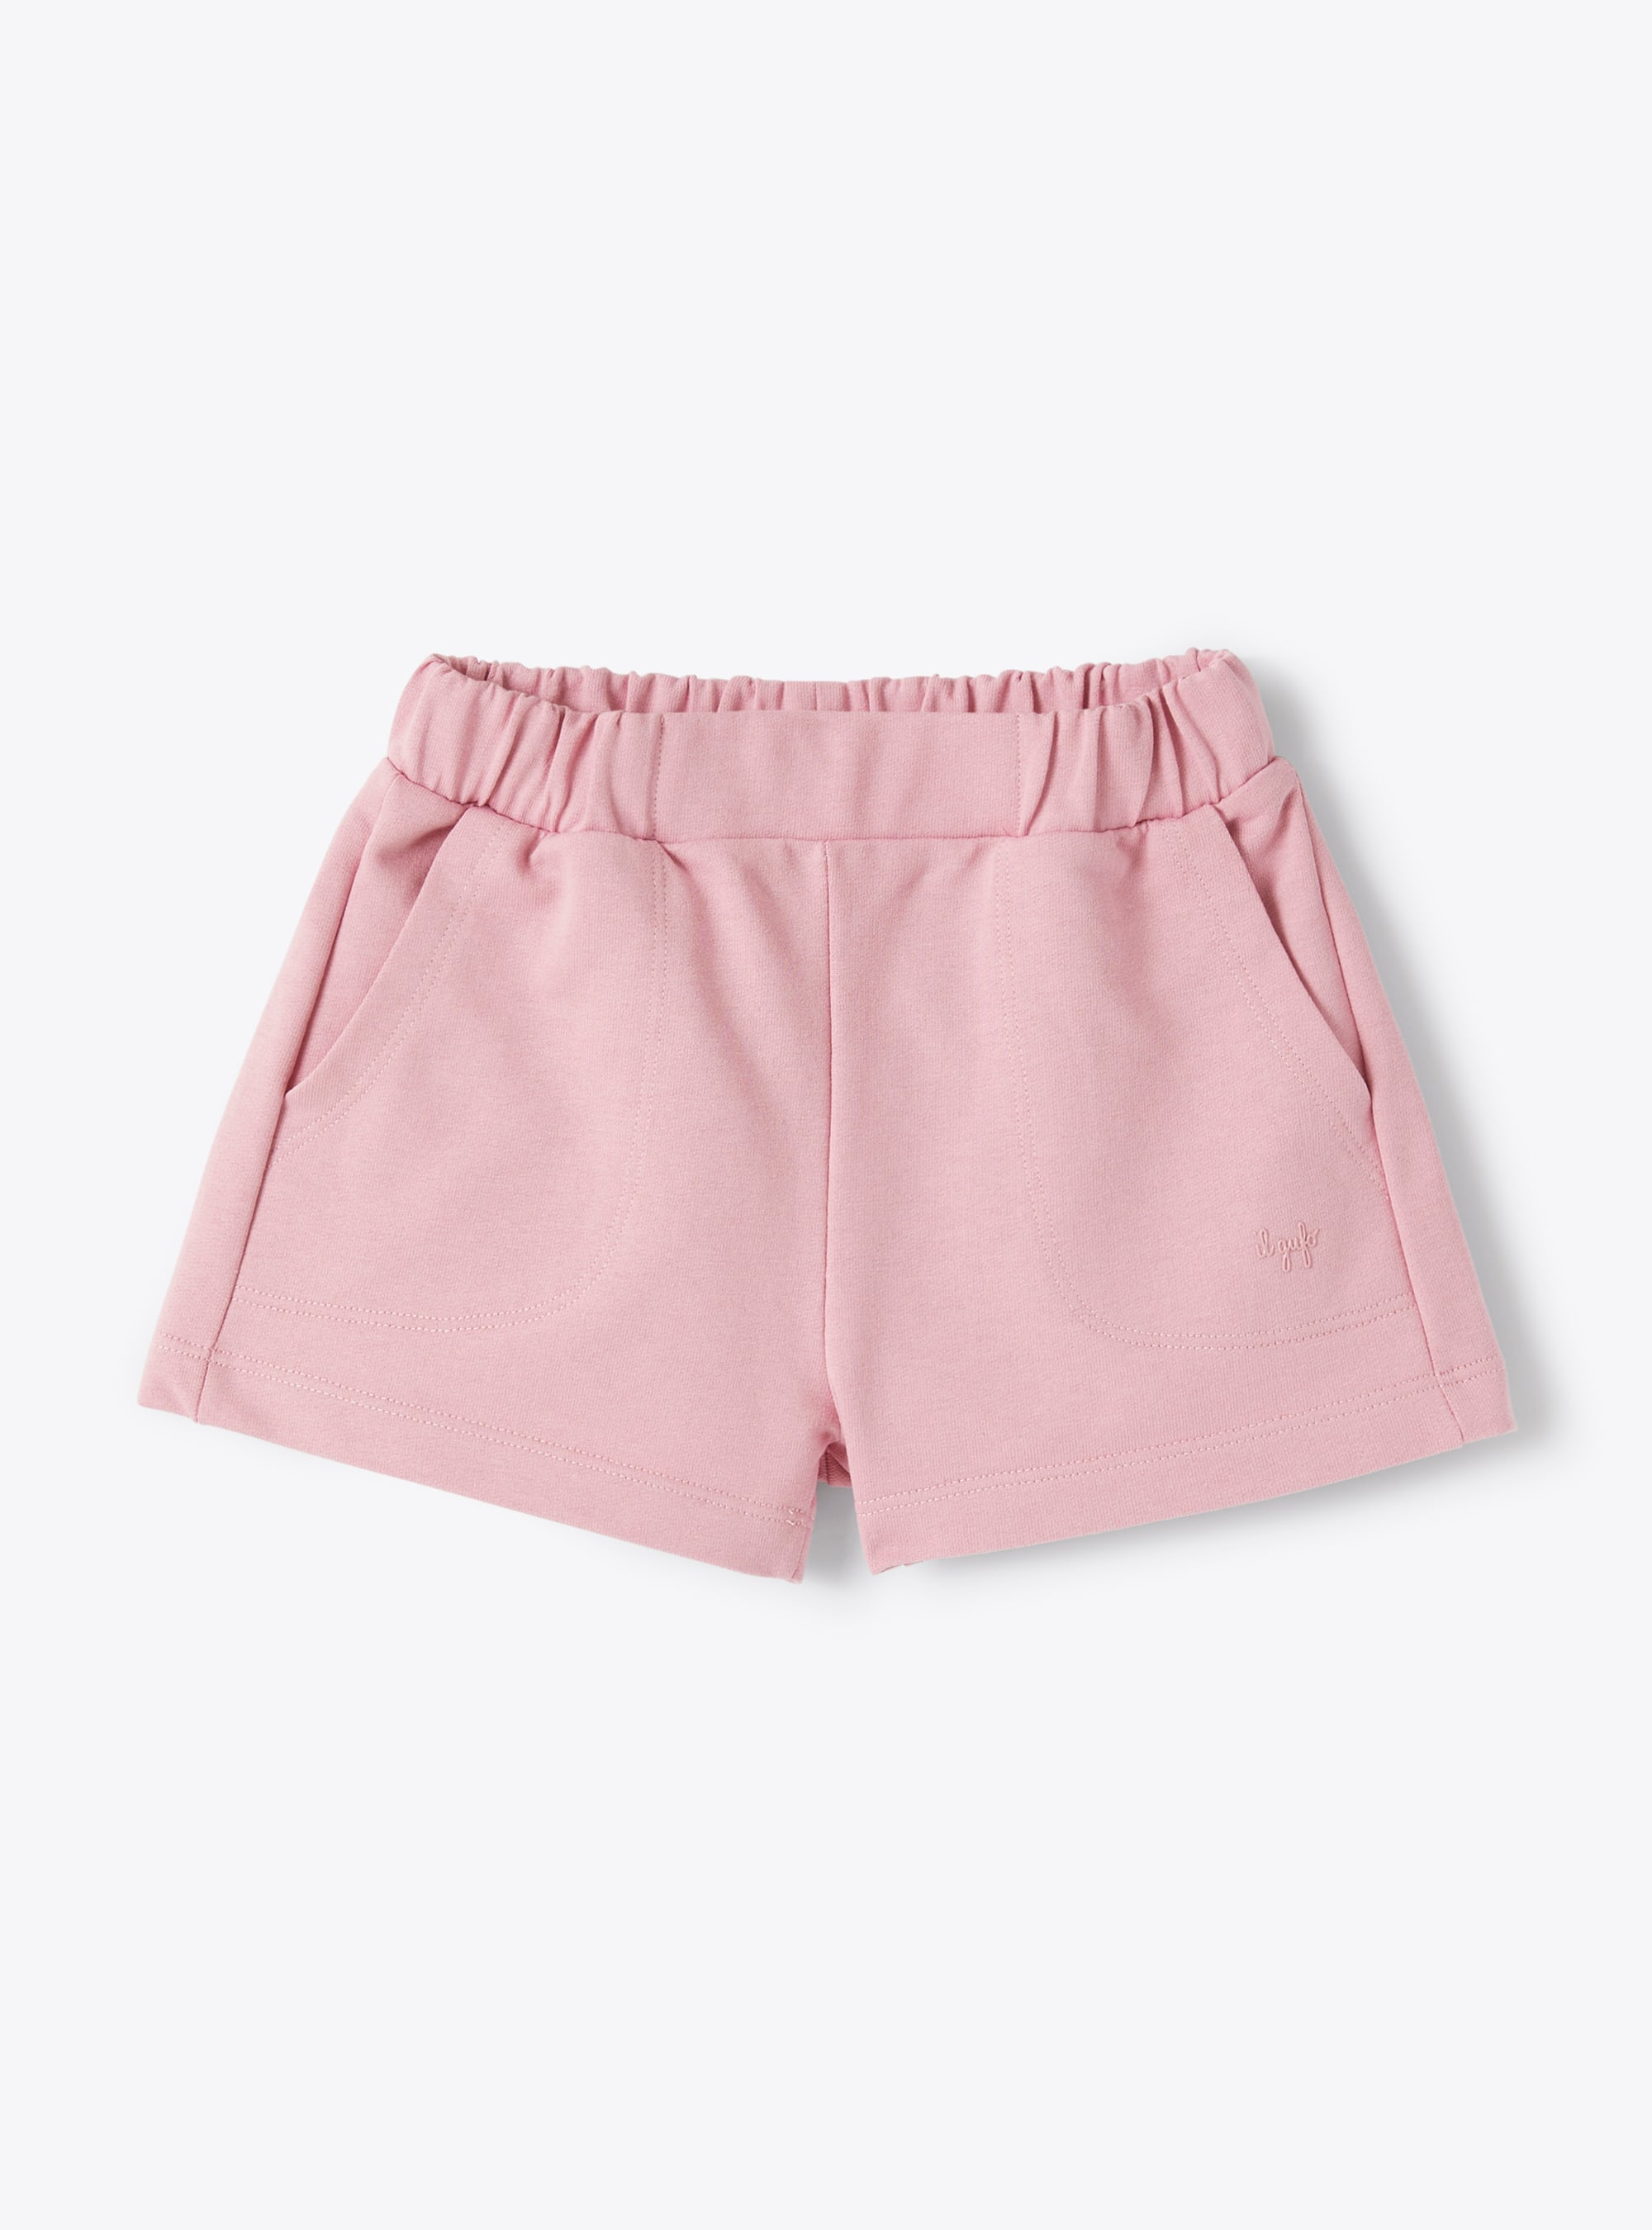 Shorts in pink cotton fleece - Trousers - Il Gufo